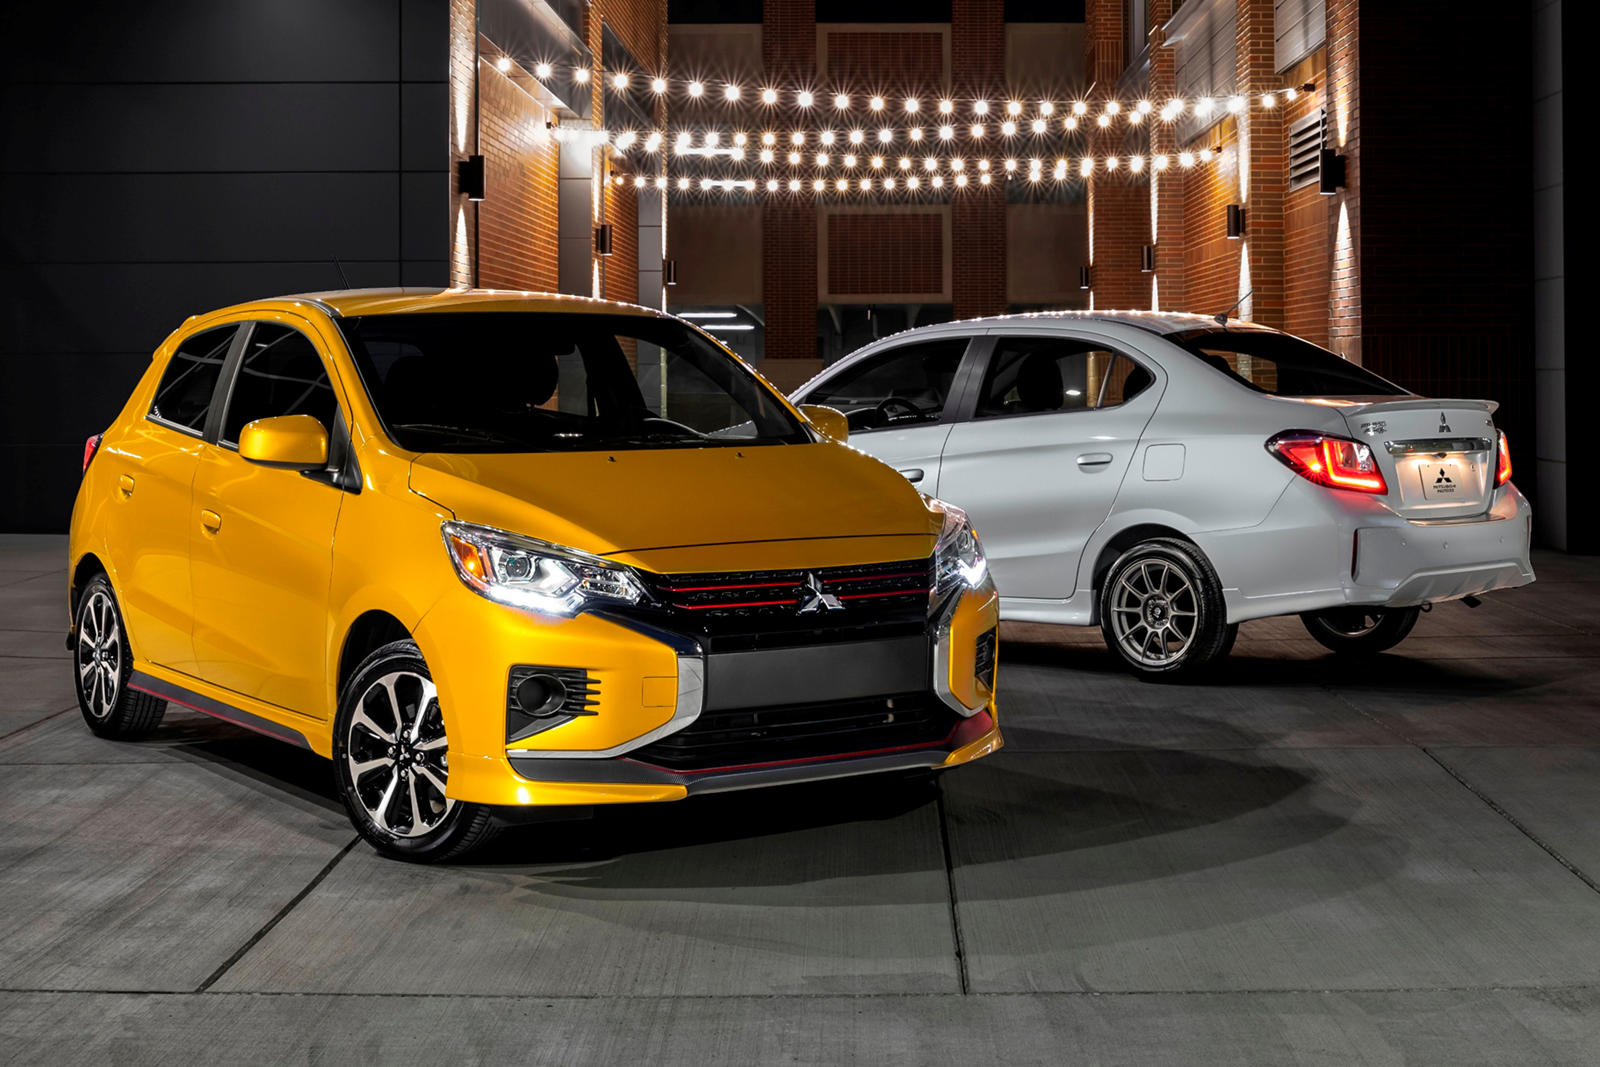 2021 Mitsubishi Mirage Arrives Looking Better Than Ever | CarBuzz